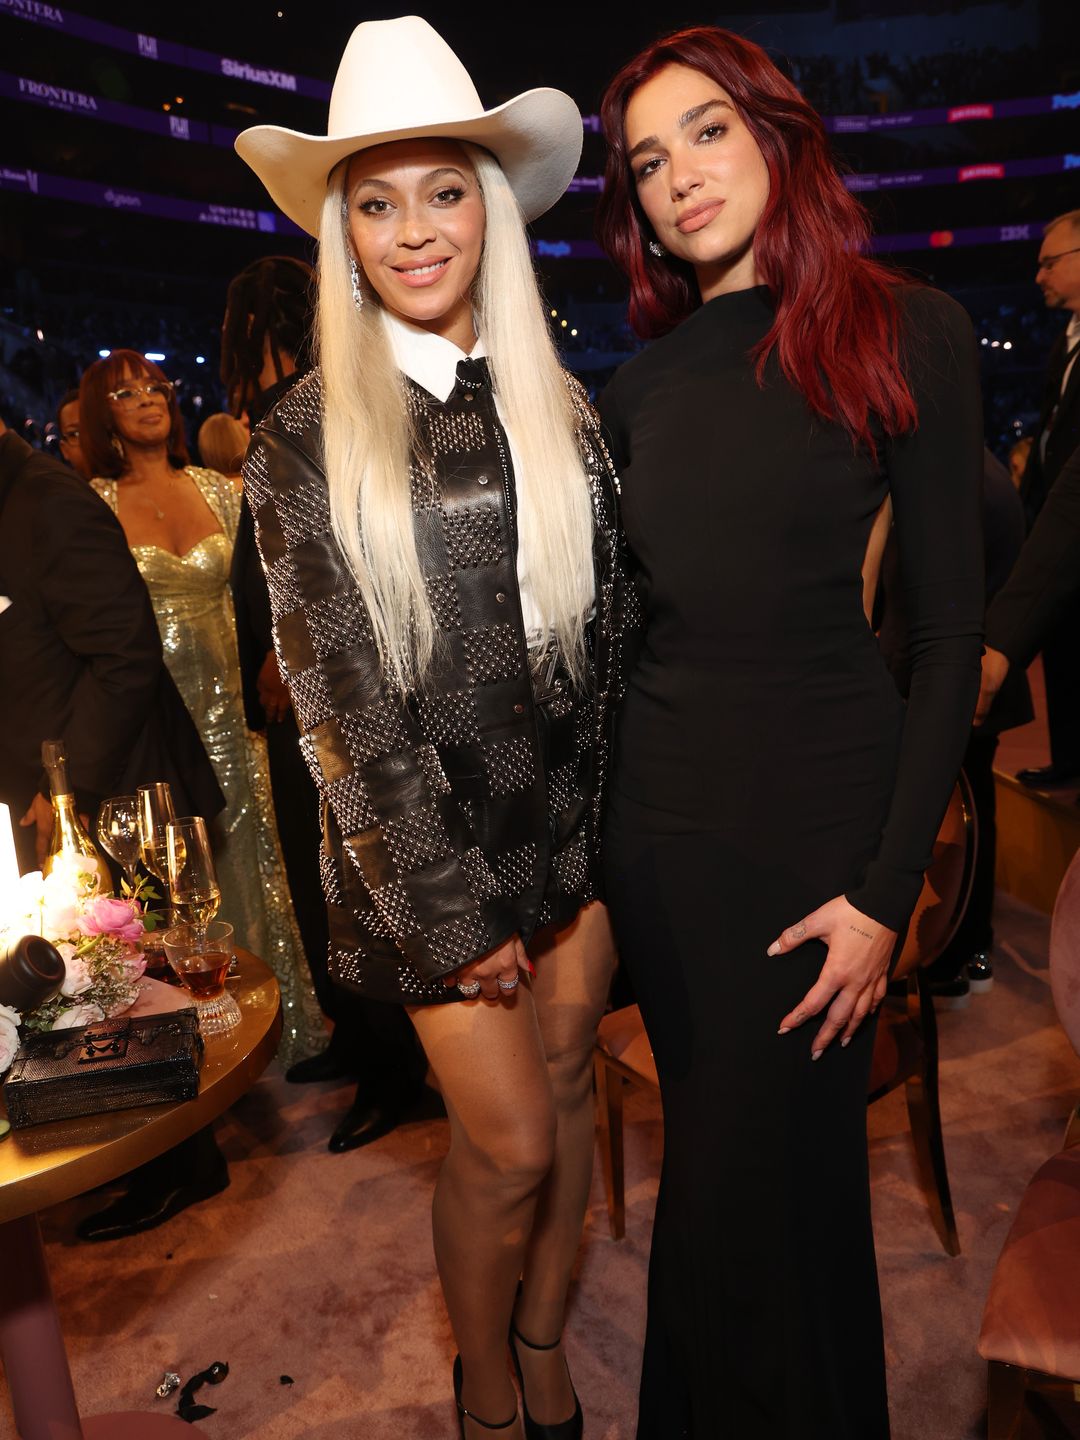 Dua Lipa poses with Beyonce at the 66th GRAMMY Awards. Dua wears a black gown where Beyonce wears a louis vuitton blazer dress and cowboy hat